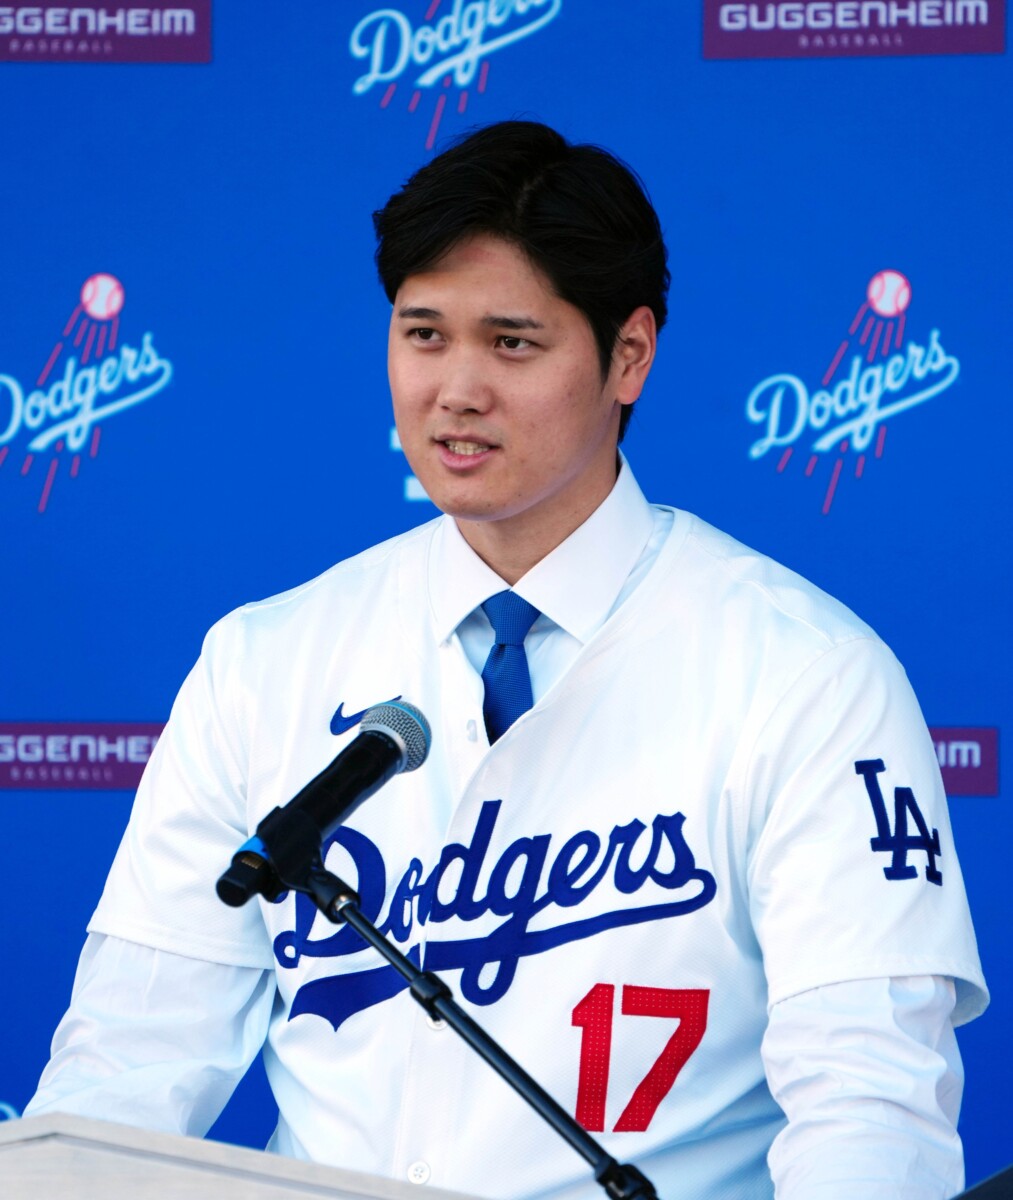 Dodgers News: Shohei Ohtani ‘Confident’ He’ll Be Ready for Opening Game vs. Padres in Korea